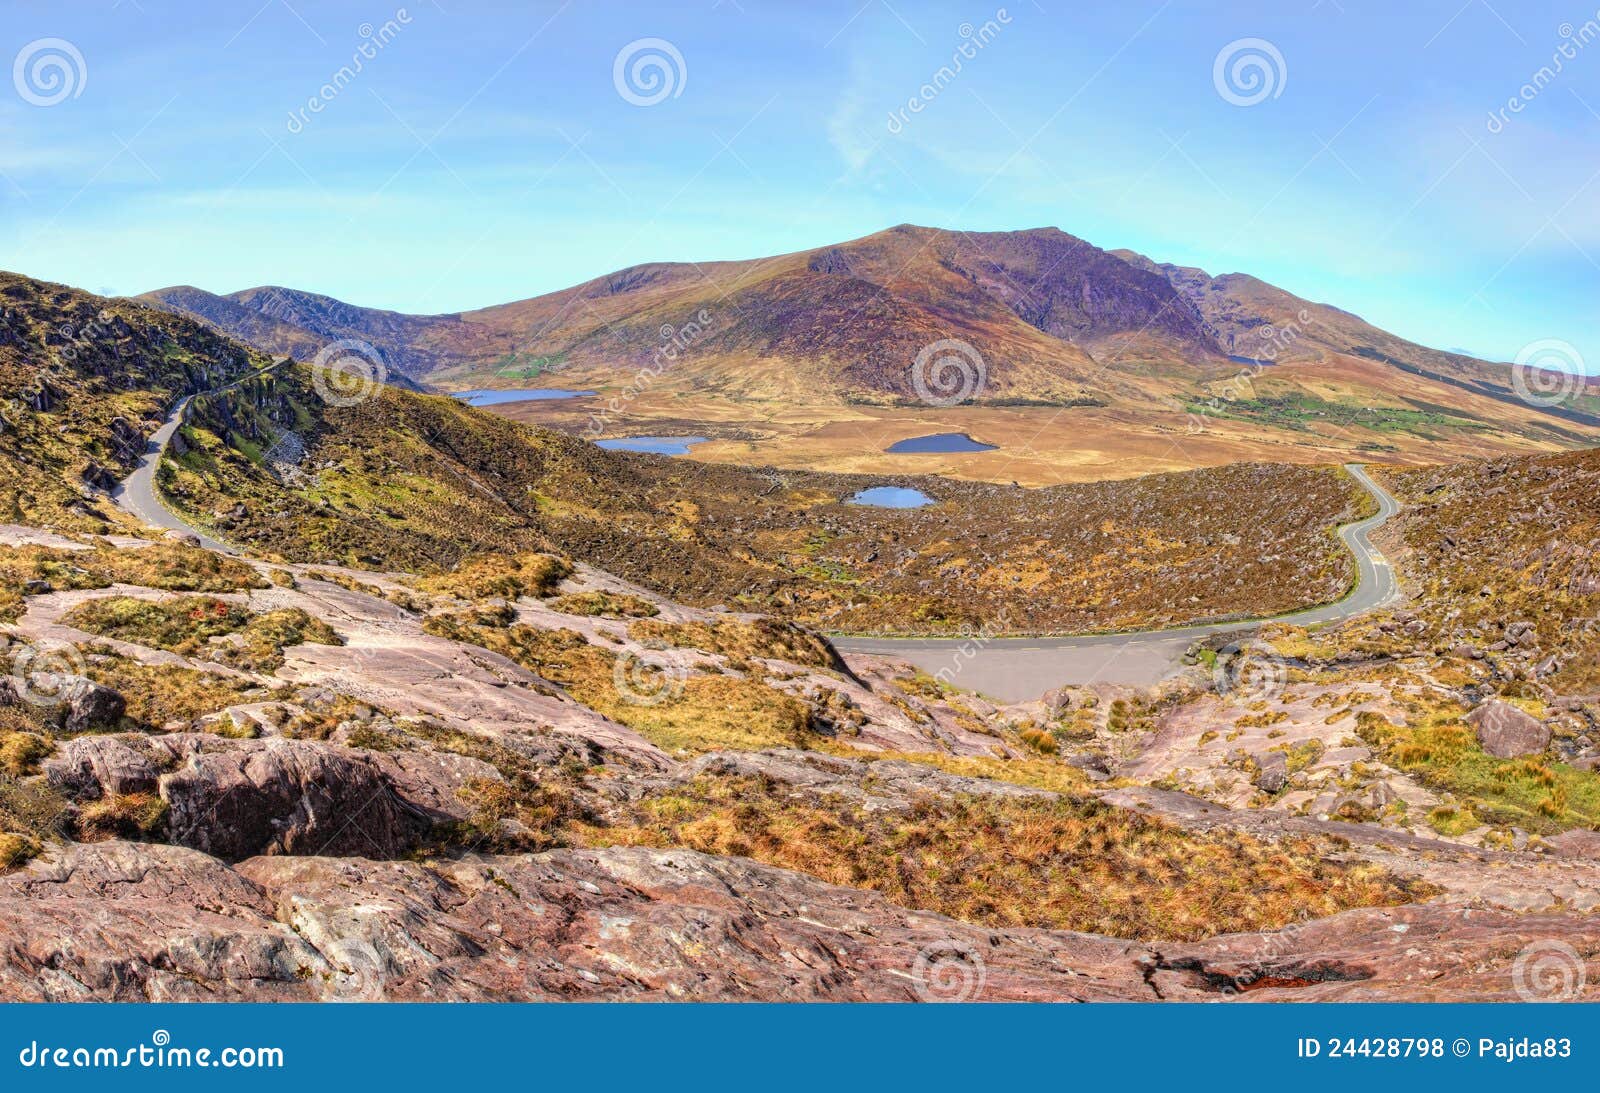 conor pass in the mountains of dingle, ireland.